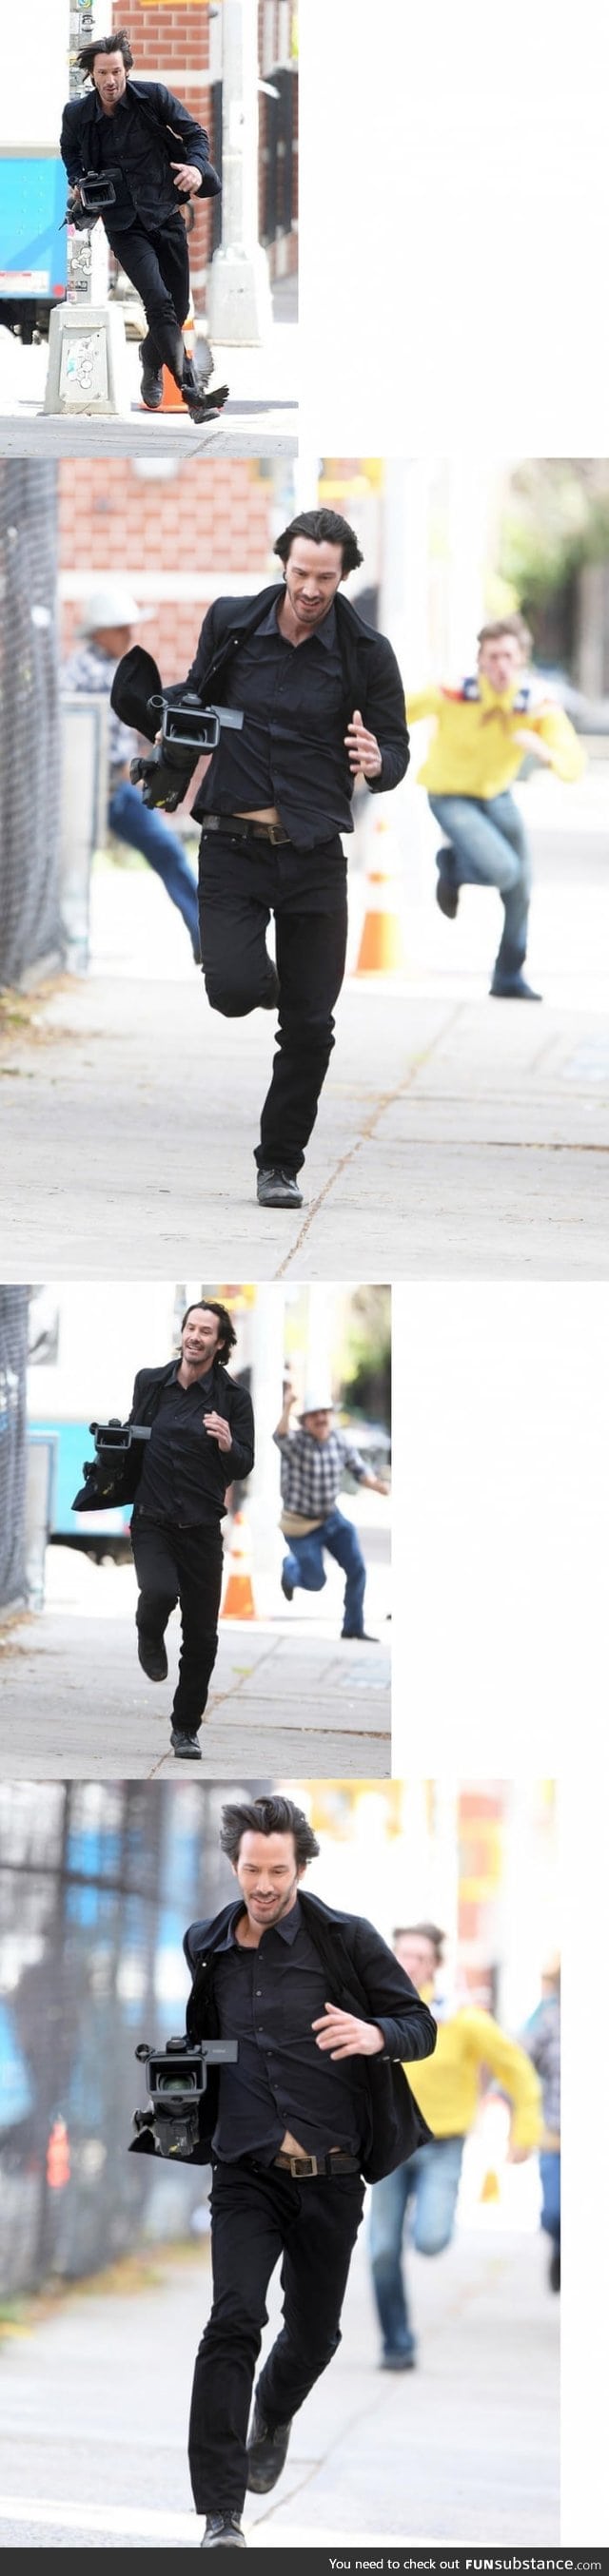 Keanu Reeves just casually running with paparazzi's camera